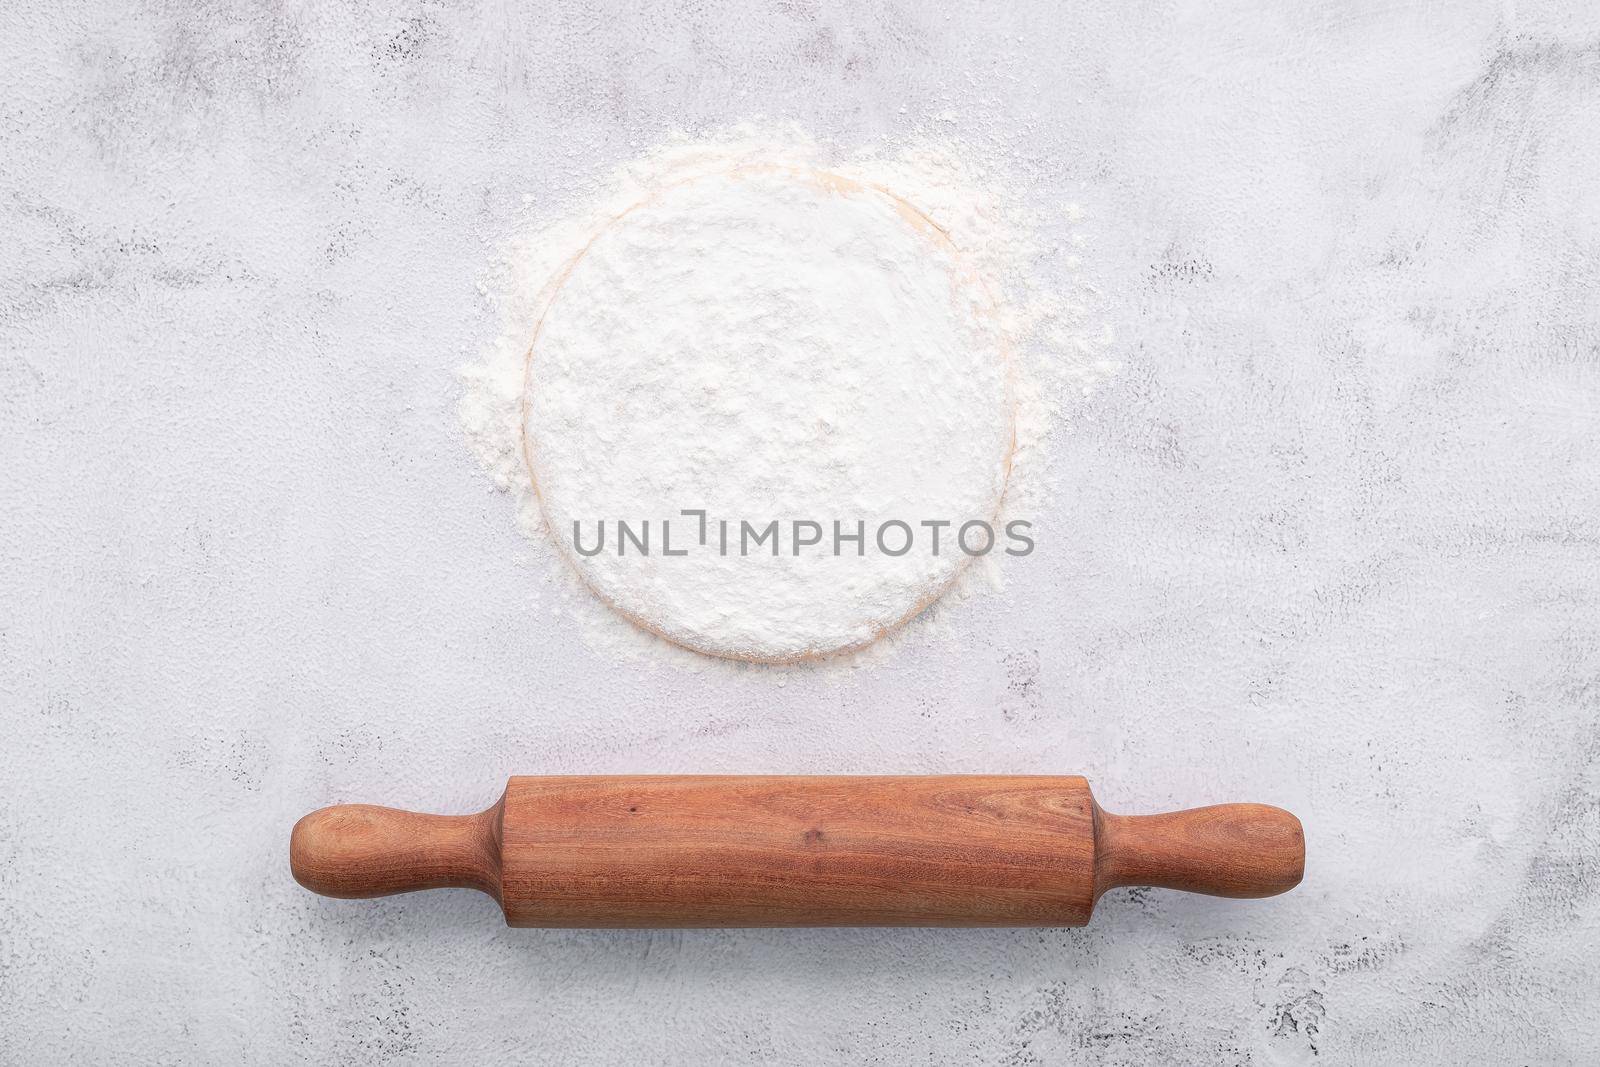 Fresh homemade yeast dough resting on whote concreate background flat lay with rolling pin.